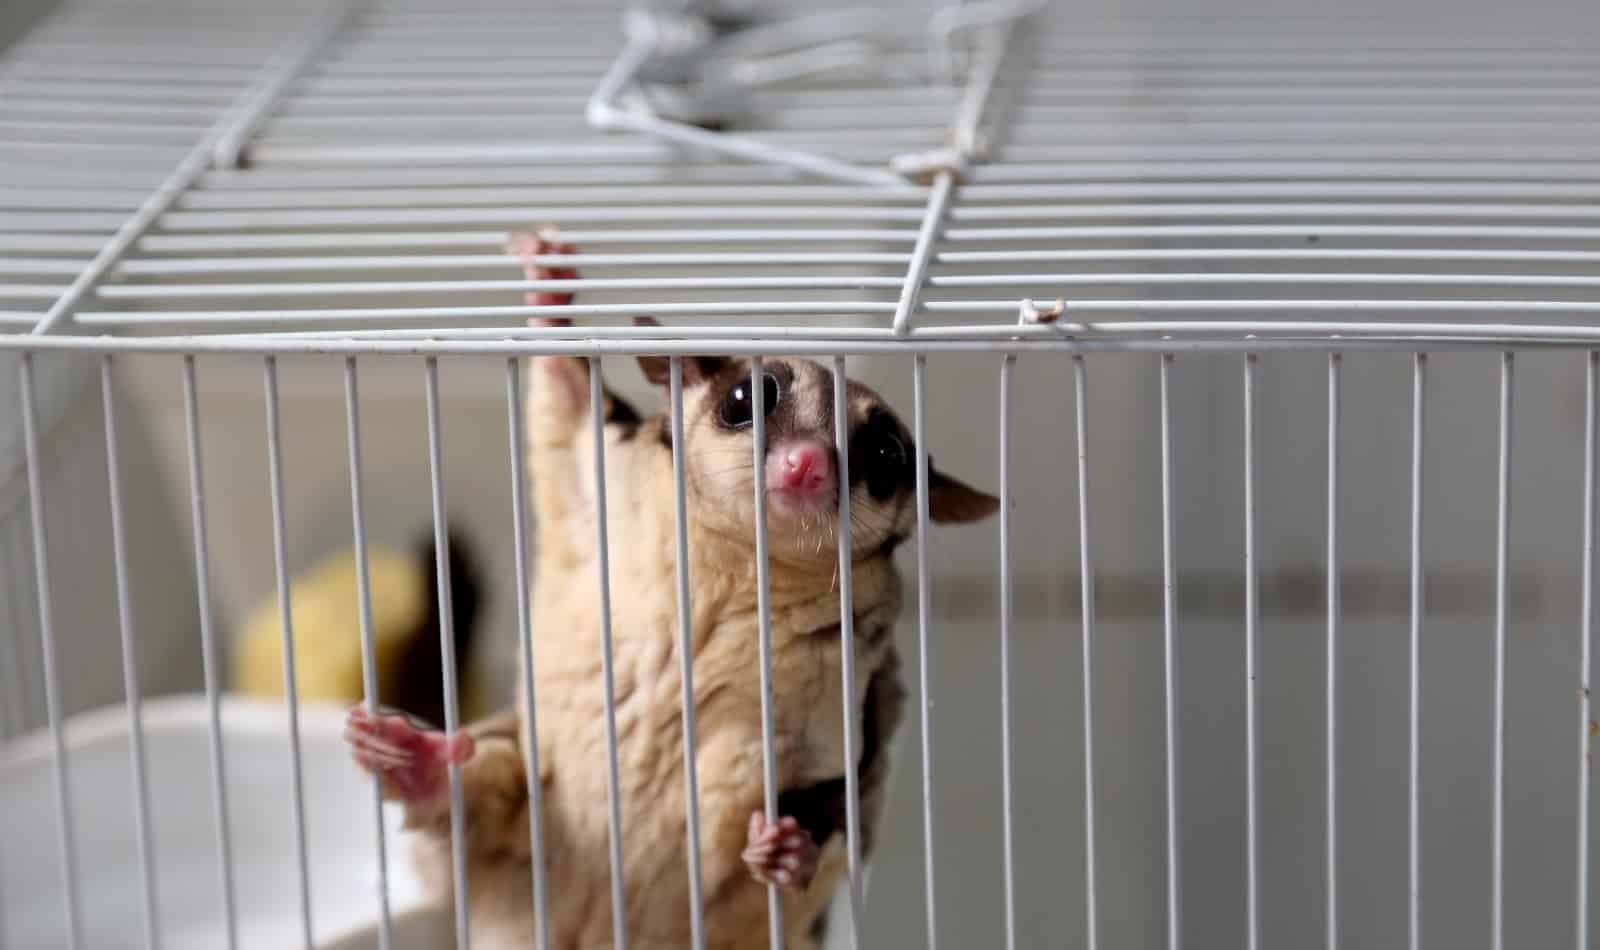 Are sugar gliders legal in your state? Read on for a complete overview of US laws regarding this trendy new pet.